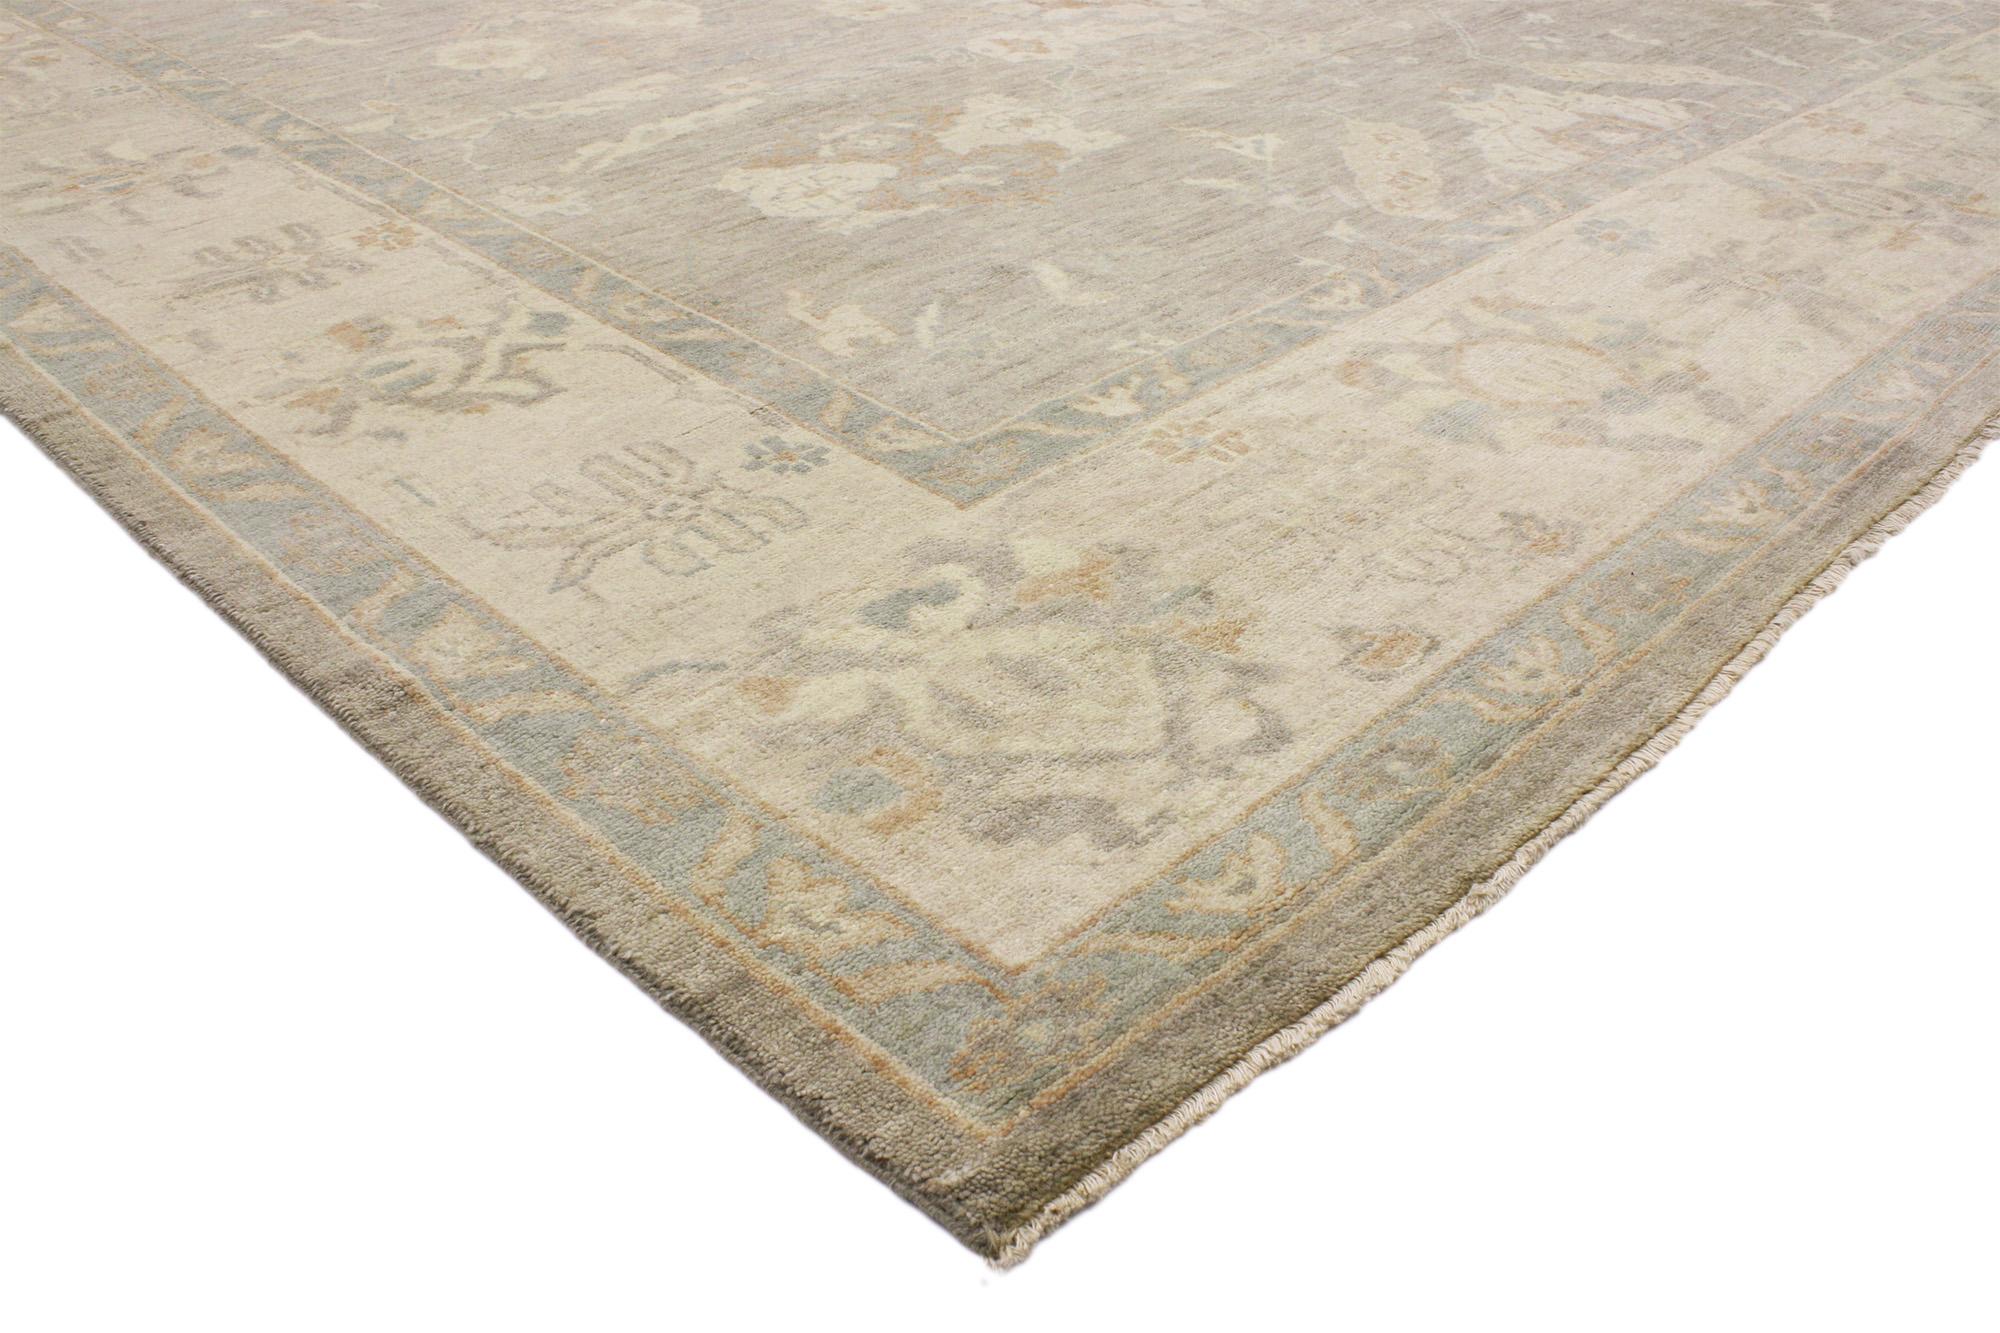 30167 New Transitional Oushak Area Rug with Rustic Artisan Style. This transitional Oushak style rug is patterned with an all-over botanical theme in a sublet and warm color palette. A central row of floral medallions is surrounded by lush palmettes